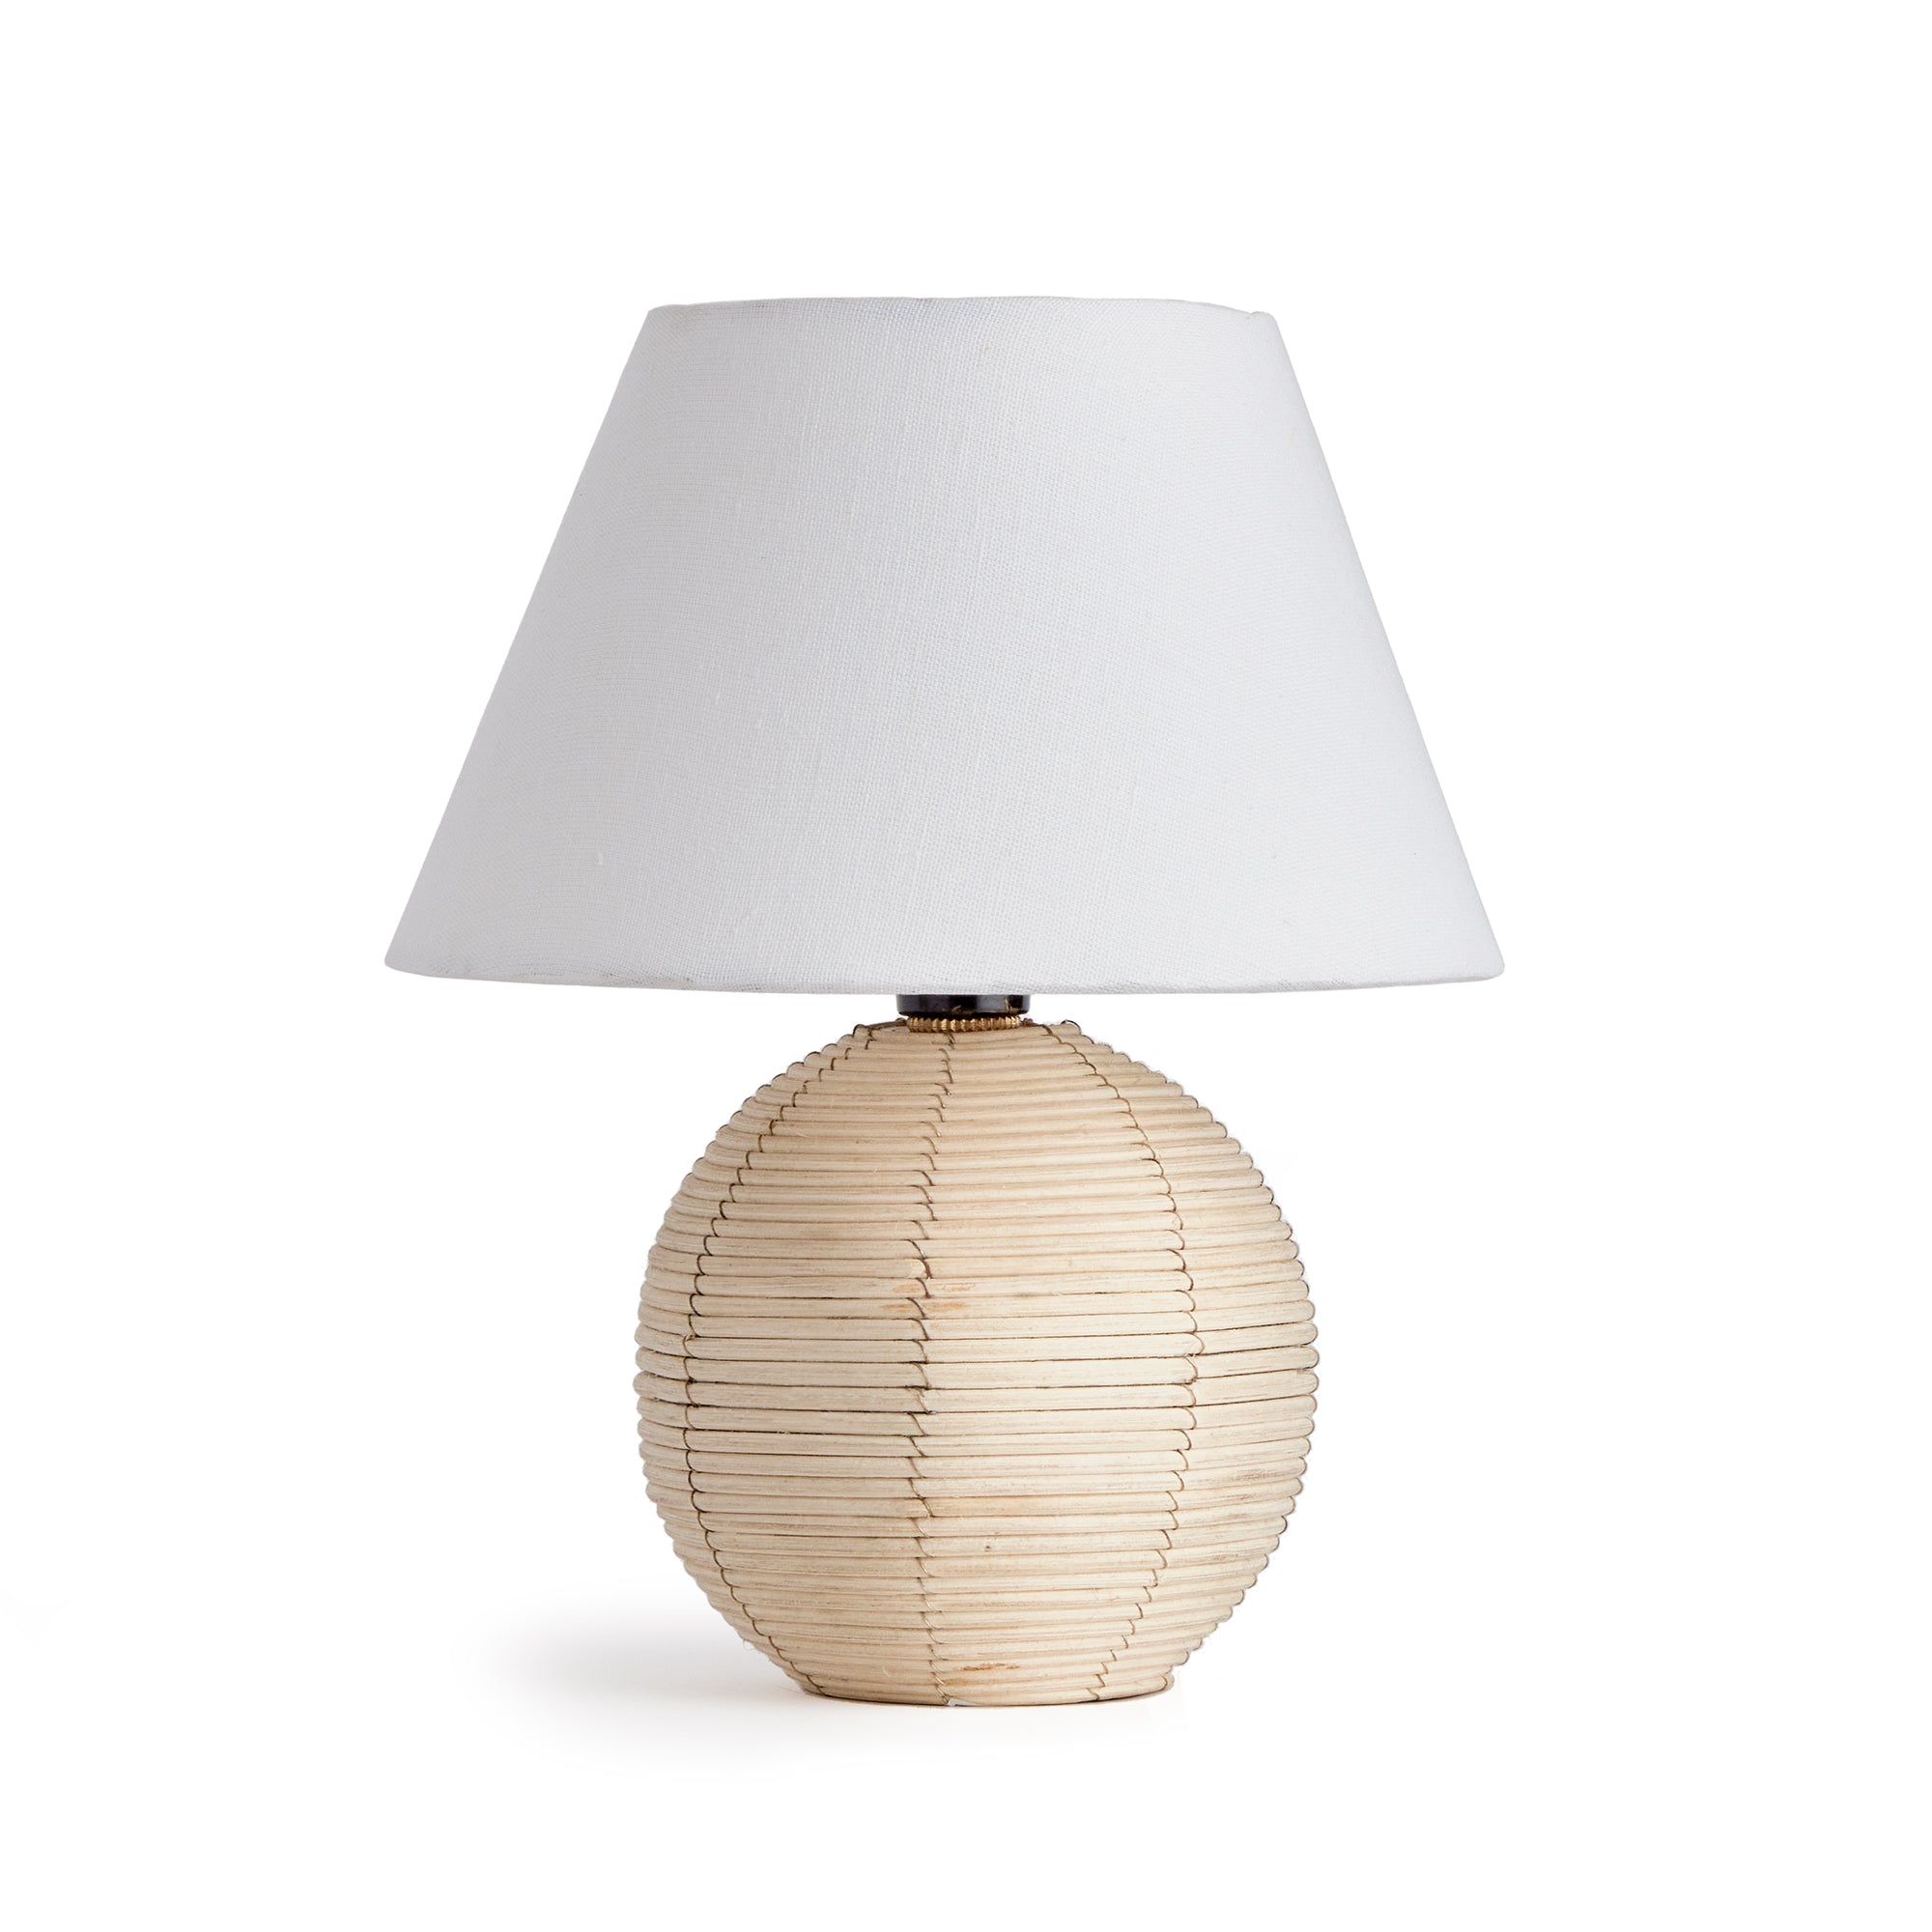 Woven in a natural cane rattan, with subtle variations in color making each one truly unique, this mini lamp is an instant classic. The petite shape and tailored shade make it the ideal lamp for kitchen counter or small workspace. Amethyst Home provides interior design, new construction, custom furniture, and area rugs in the Miami metro area.